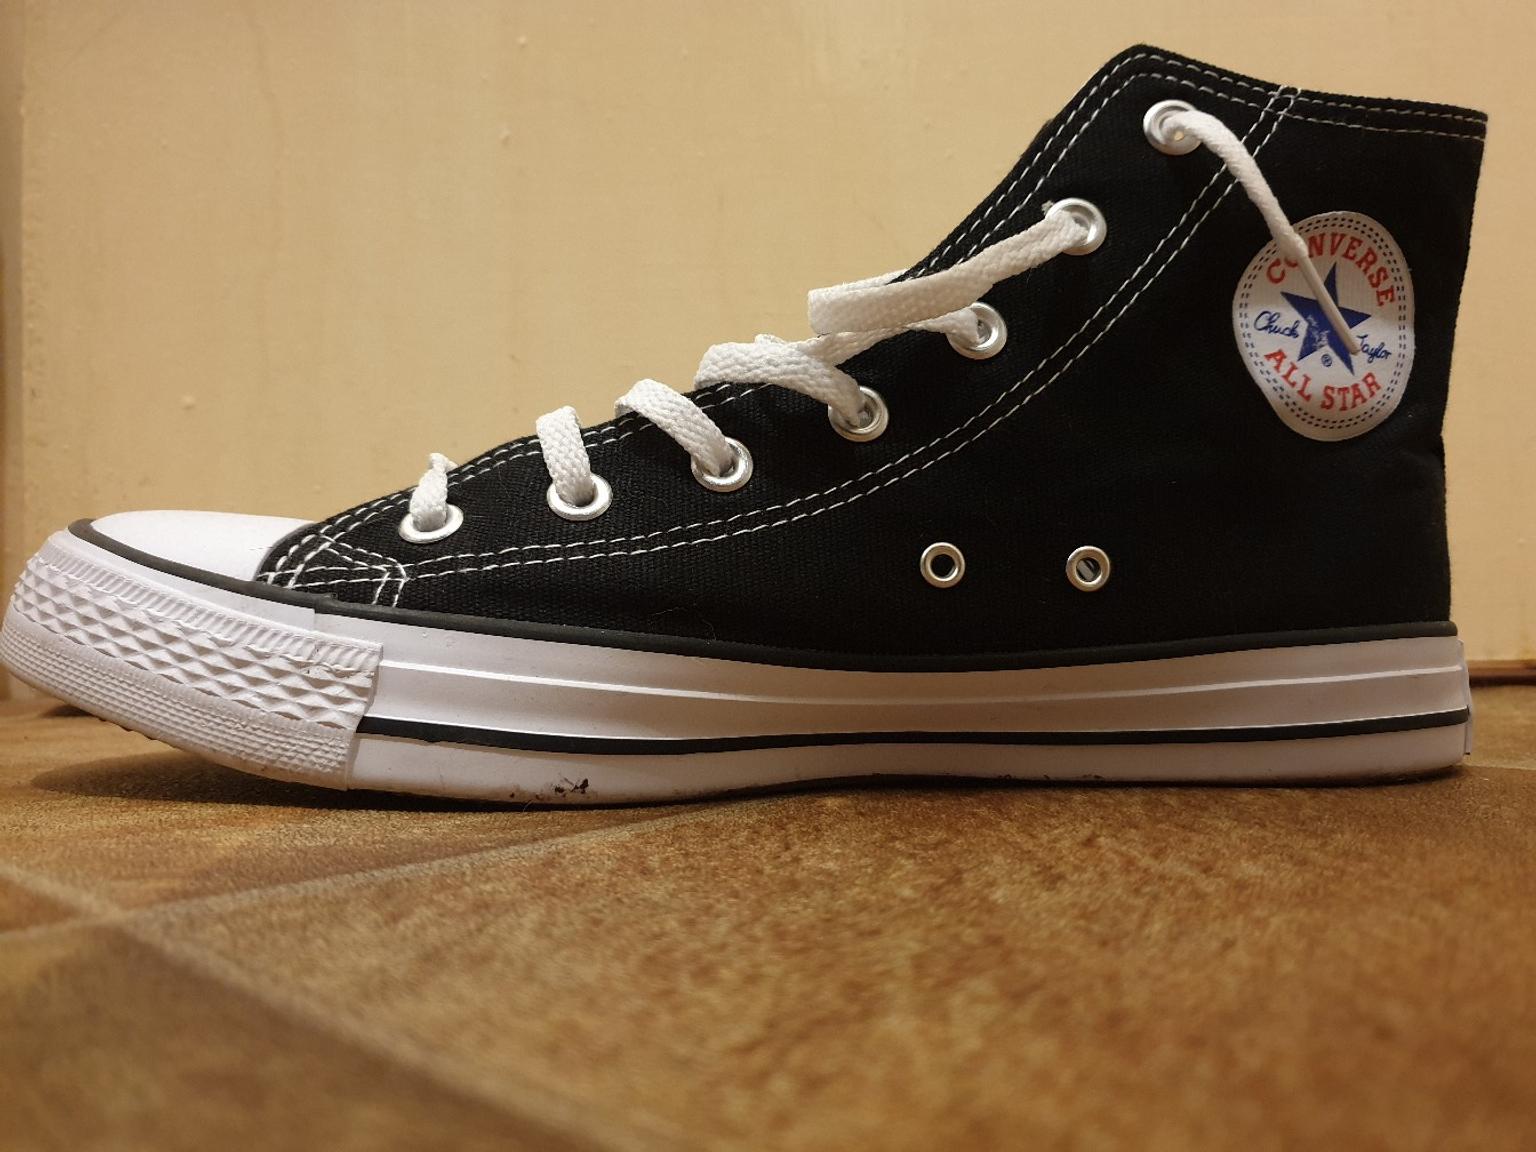 Black Converse UK size 8 in M14 Manchester for £16.00 for sale | Shpock